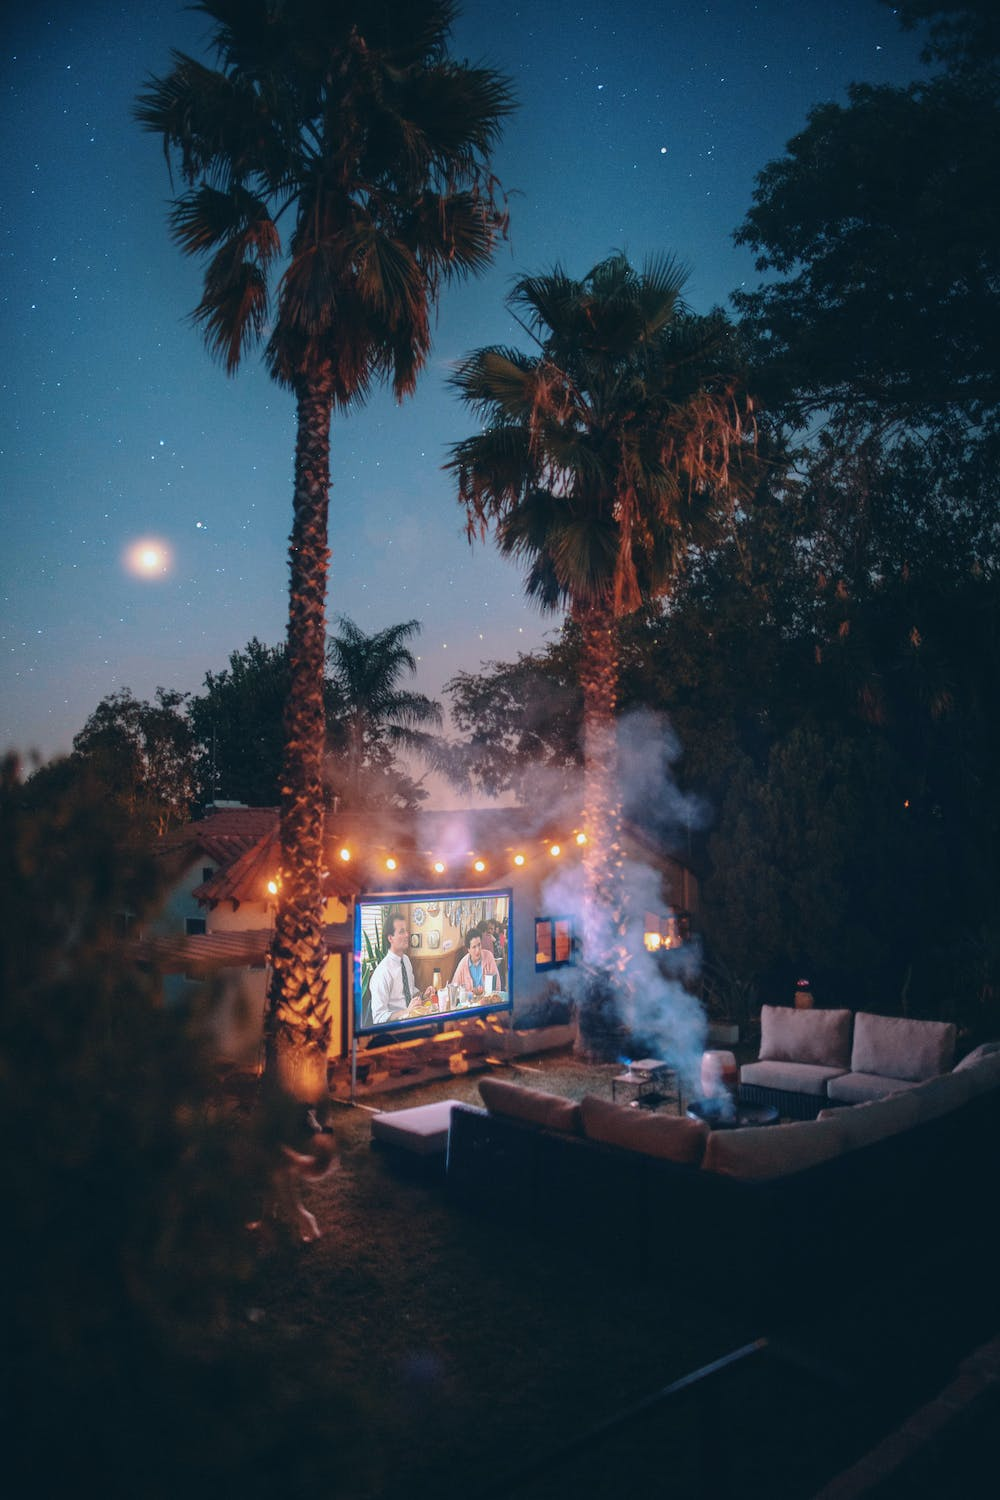 An image of a movie playing on a projector in the backyard at night